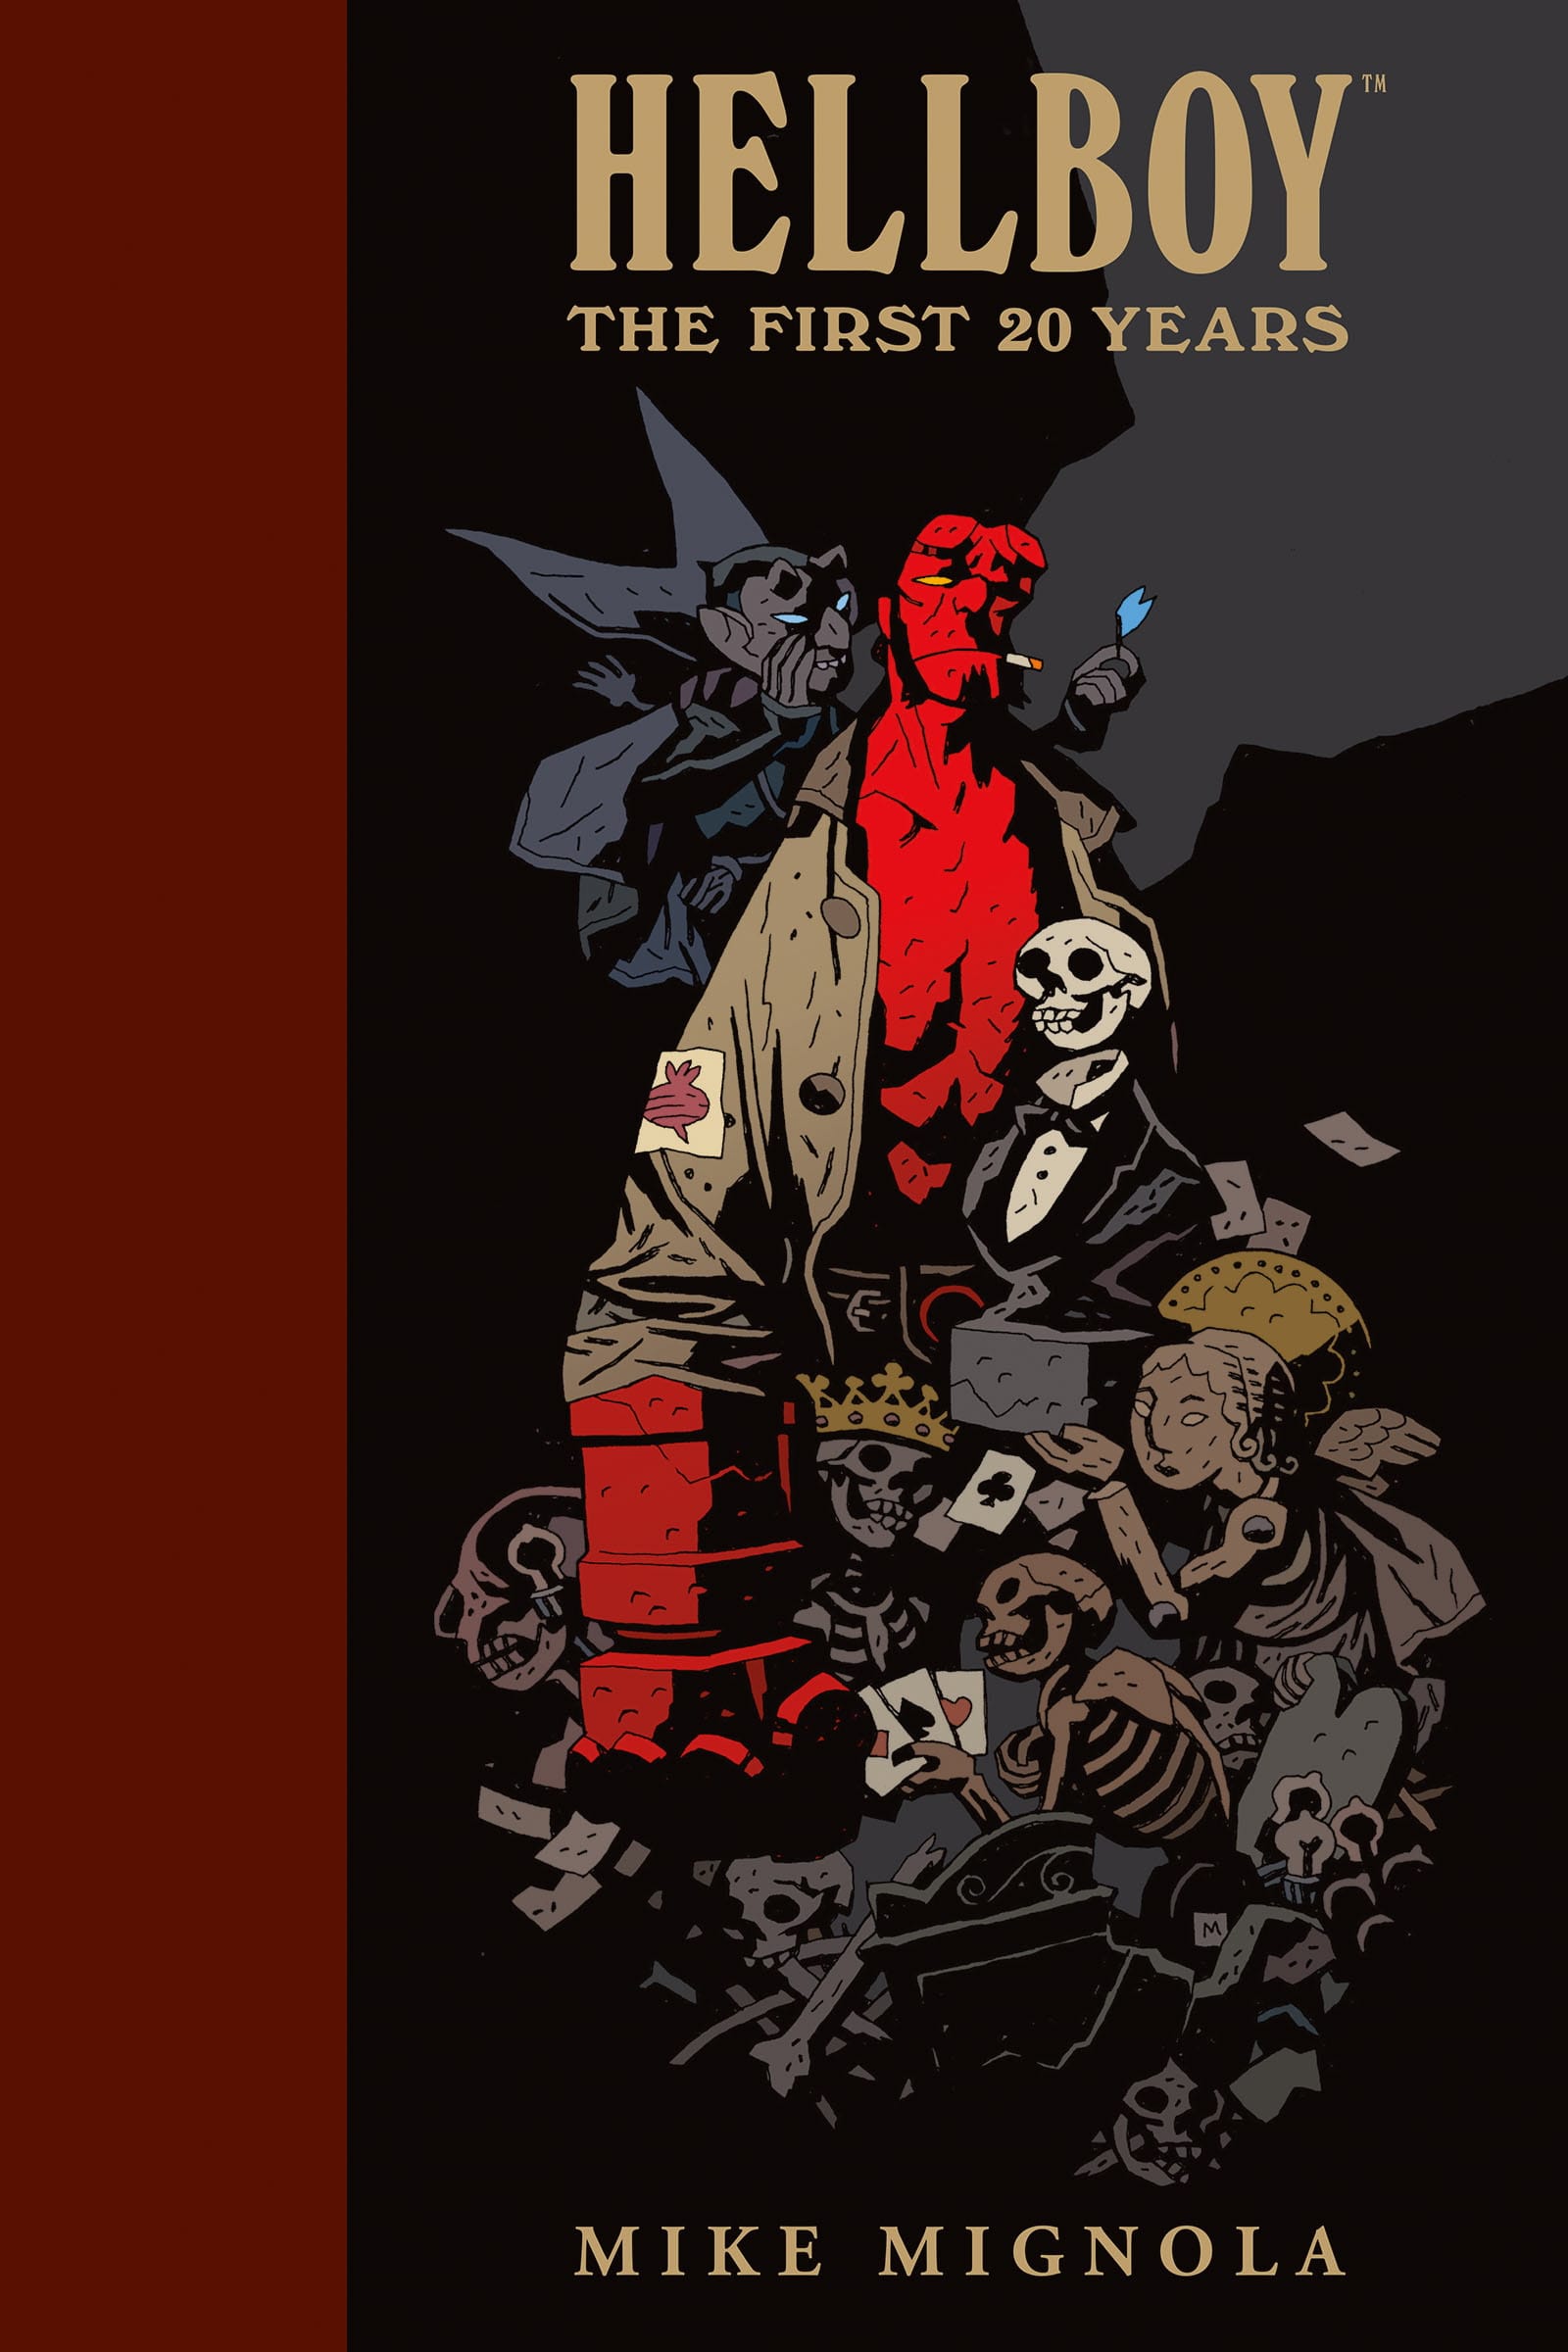 Dark Horse Comics
It has been two decades since artist Mike Mignola created a horned, red-hued devilish beast with a penchant for cigars. In that time, Hellboy has jumped from the pages of Dark Horse Comics to animation and film.